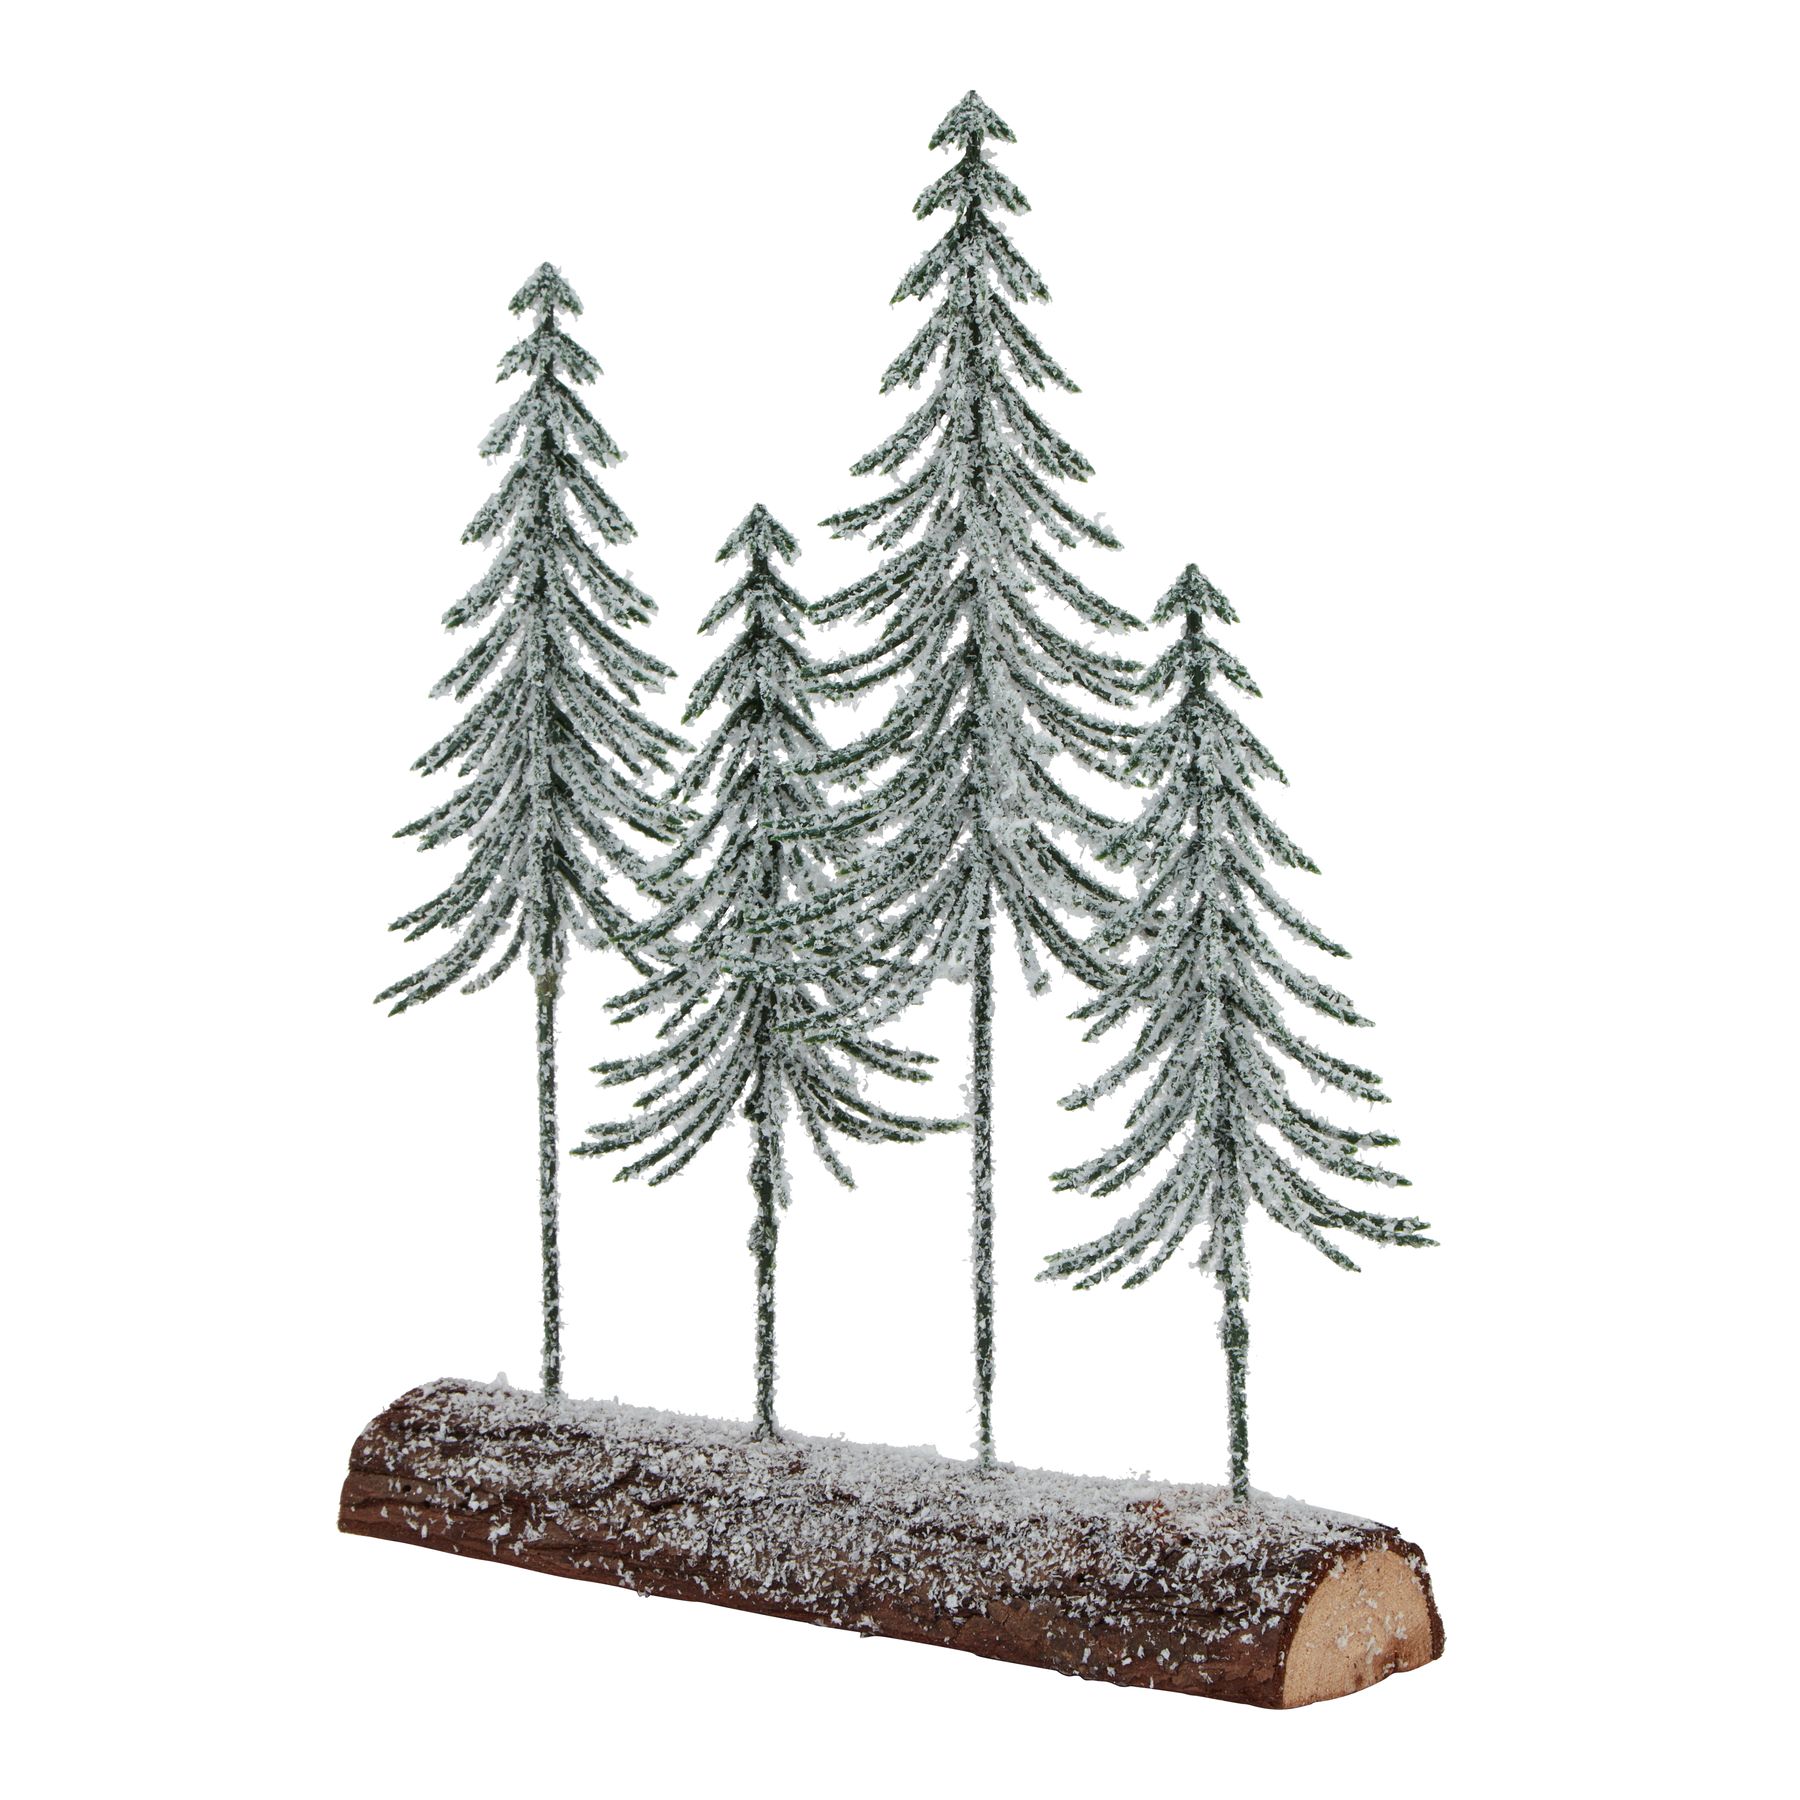 Small Snowy Spindle Tree Quad In Wood Log - Image 1